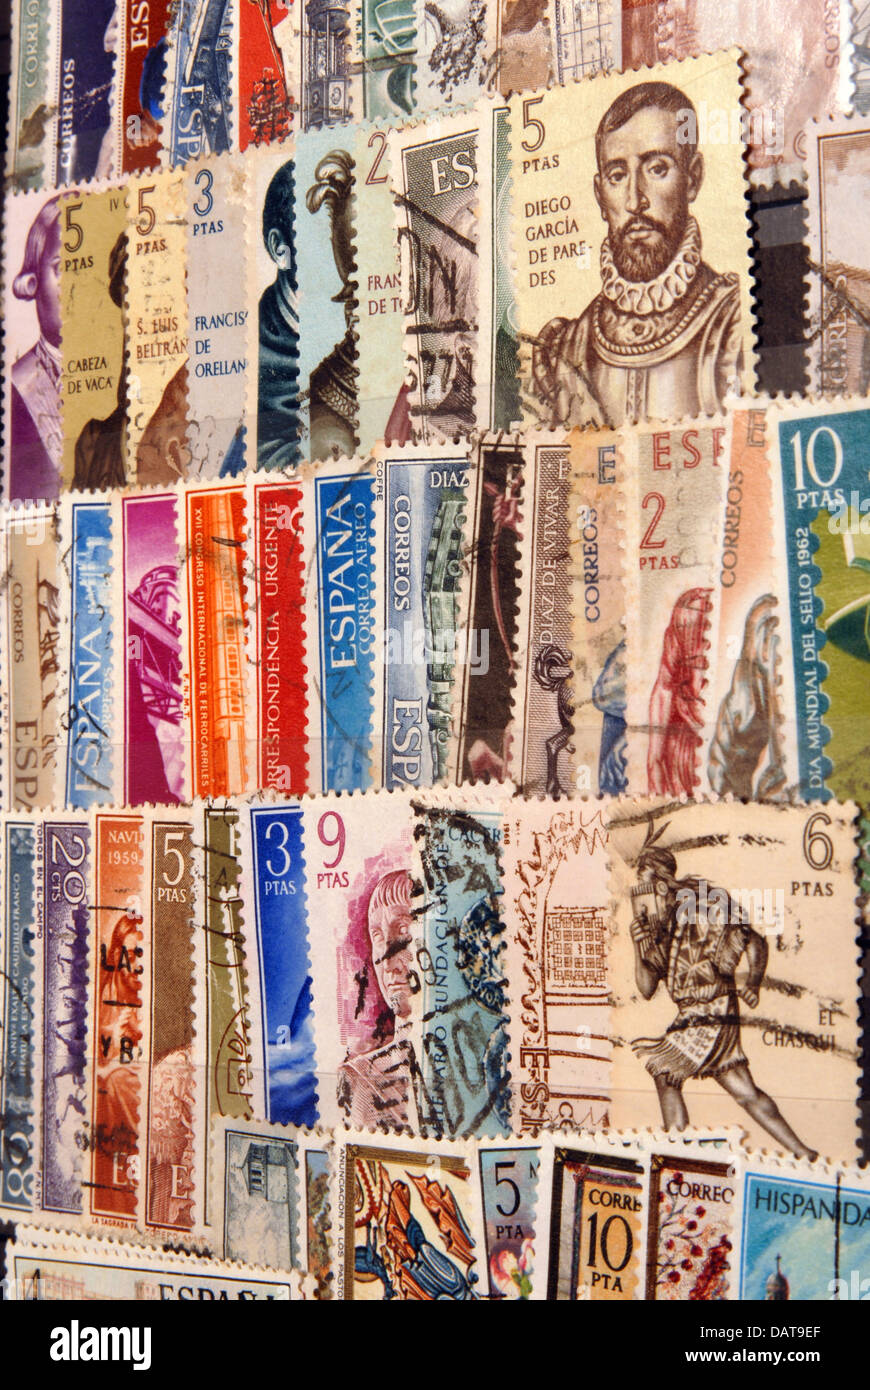 Stamp collection from Spain Stock Photo